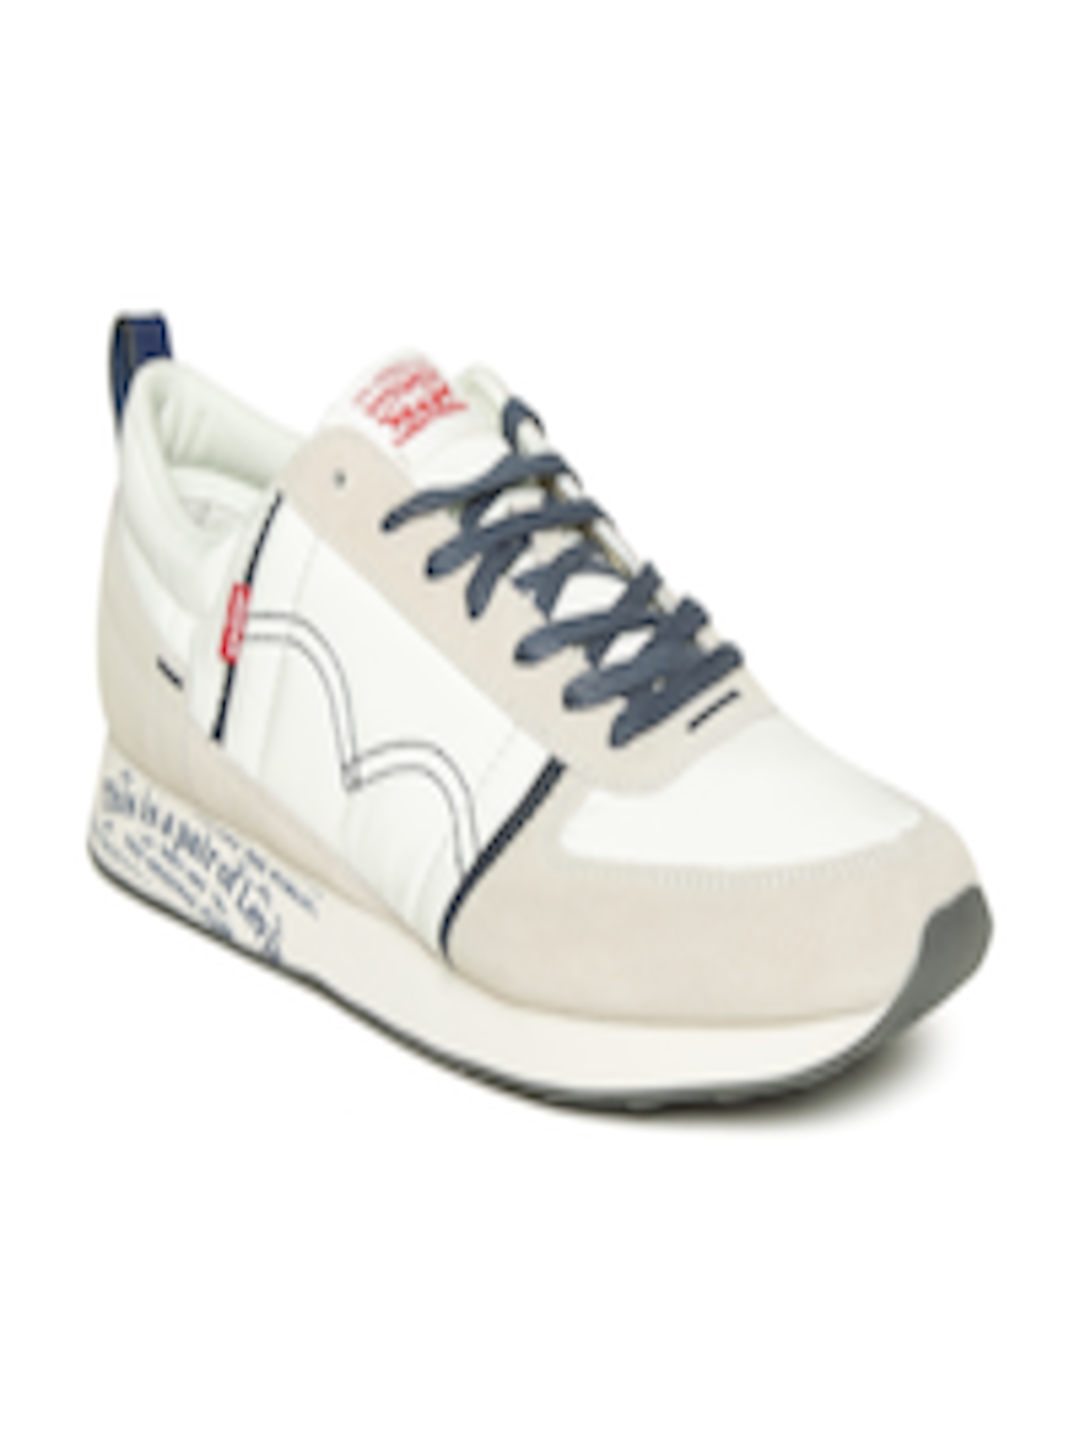 Buy Levis Men Off White & Beige Sneakers - Casual Shoes for Men 2447476 | Myntra1080 x 1440